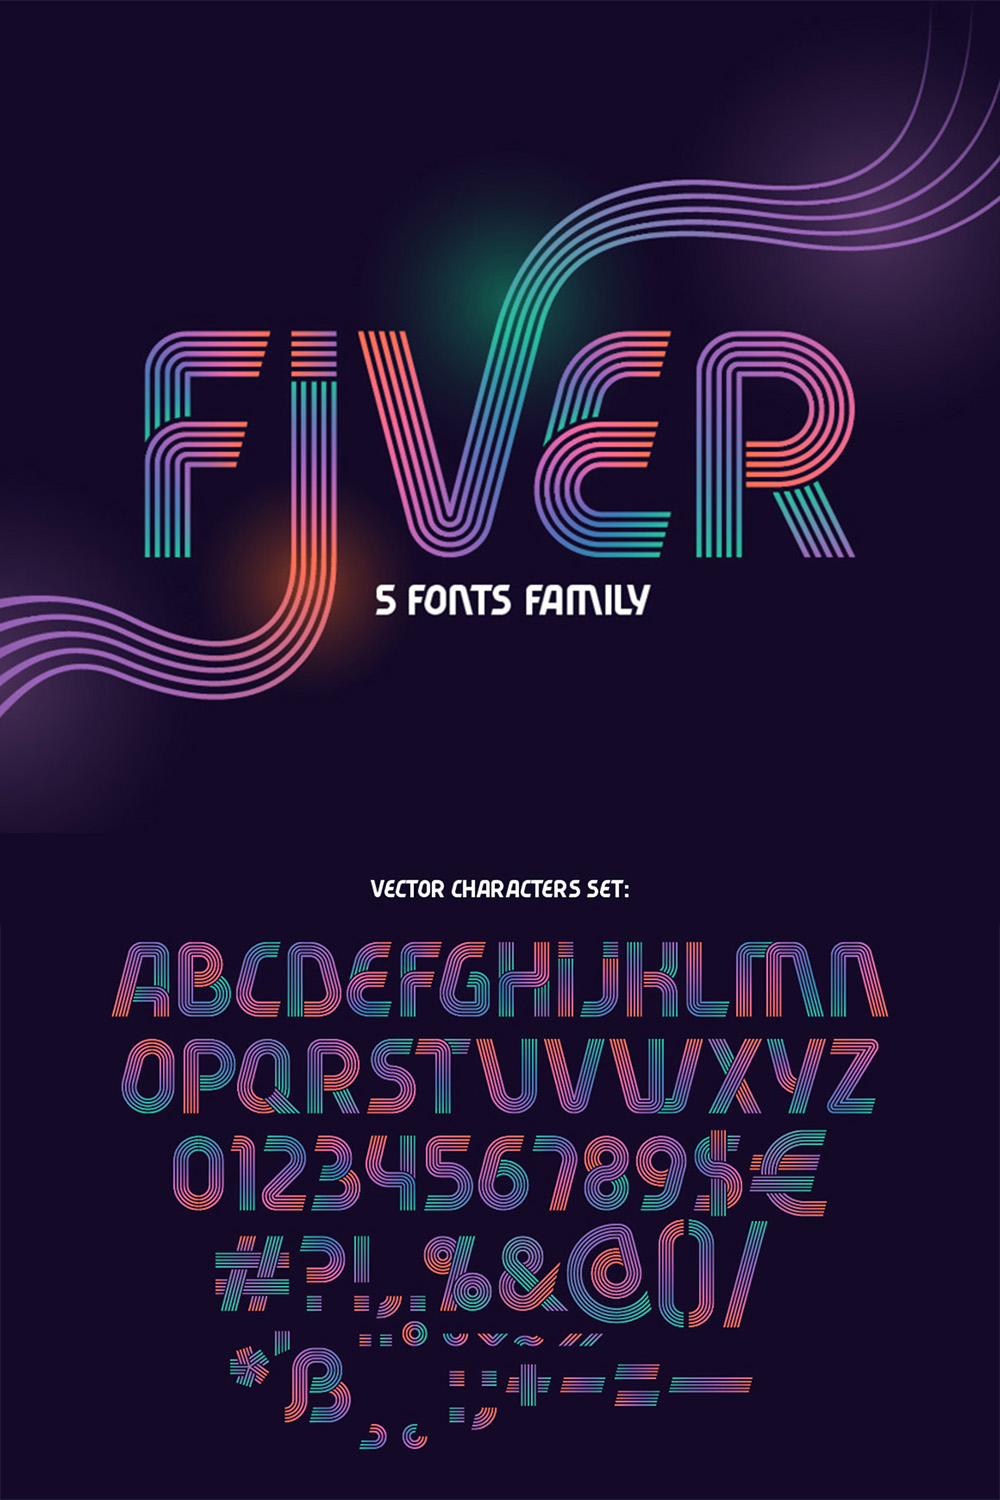 Fonts Family Fiver Display pinterest image.